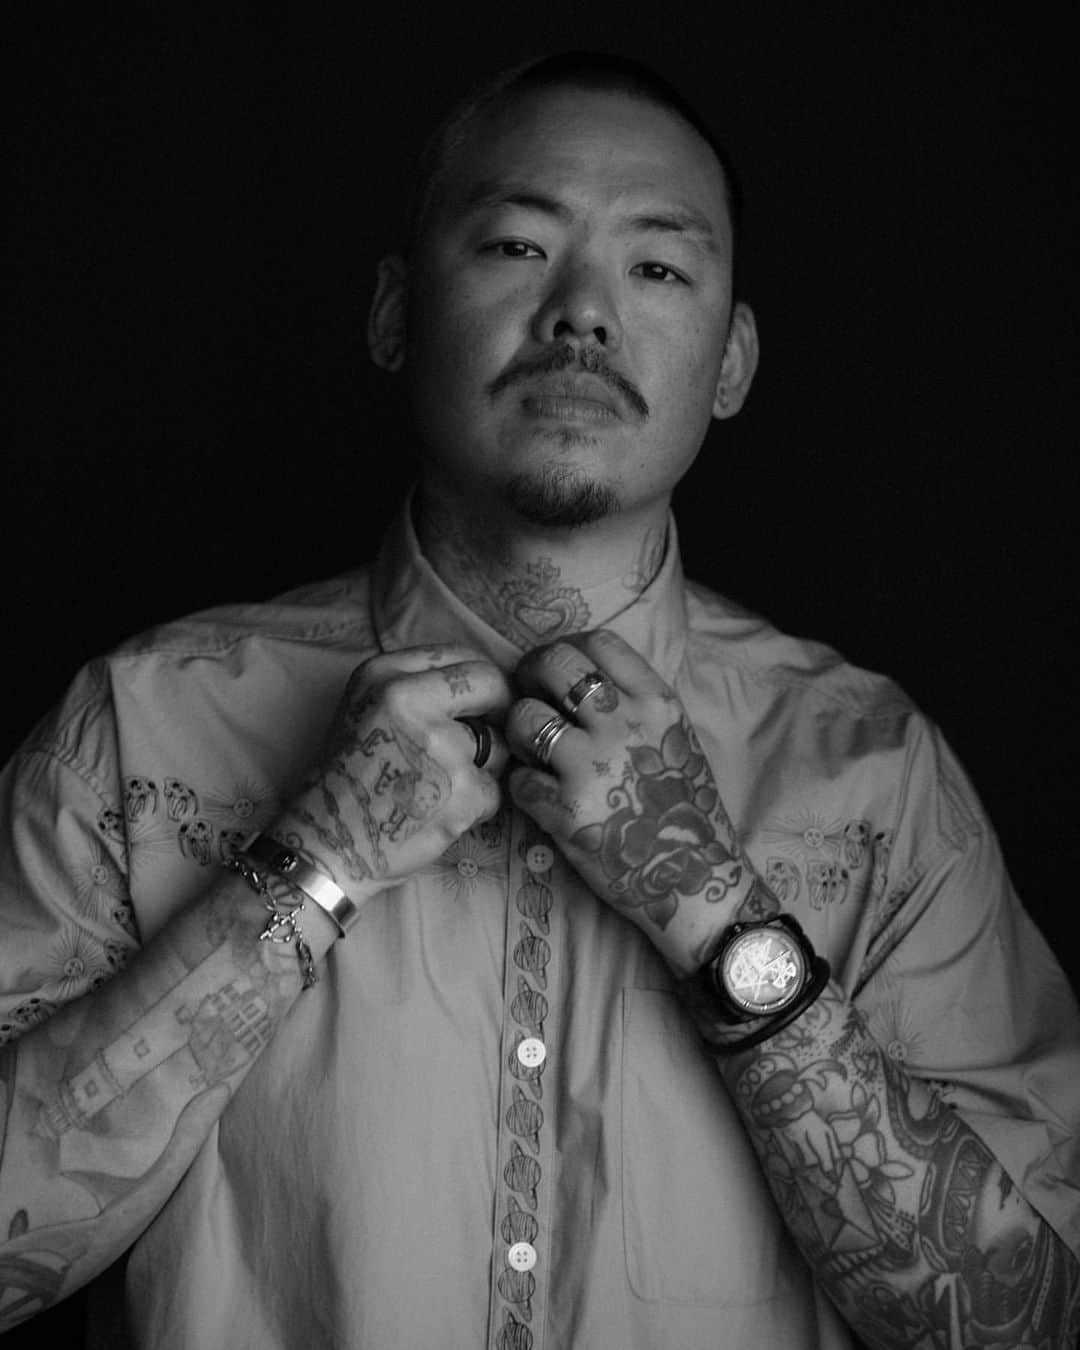 滝沢伸介さんのインスタグラム写真 - (滝沢伸介Instagram)「Posted @withregram • @neighborhood_official ⁡ ⚫️Dr. Woo / Tattoo Artist ⁡ 世界中の何百万人ものフォロワーとインフルエンサーから指示されているタトゥーアーティストとして、Dr. Wooはタトゥーとアートをファッションと共にムーブメントを起こしています。 Shamrock Social ClubでタトゥーアーティストのレジェンドであるMark Mahoneyの下でスタートを切った後、Dr. Wooはタトゥーデザインと、後に彼のスタイルとして知られるようになるシングルニードルを使ったスタイルを学びました。 彼の巧みなスタイルは、タトゥーをサブカルチャーからポピュラーなカルチャーへと変えました。 彼のプライベートスタジオであるHideaway @ Suite Xで、Dr. Wooはタトゥーの定義を前進させ続けながら、これまでのコラボレーションとブランディングに基づき、アート、ファッション、エンターテイメントメディアを融合しながら自身のカルチャーの経歴を成長させています。 ⁡ With a global following in the millions and as the choice tattoo artist for the influential elite, Dr. Woo is leading the movement where tattoos, art, and fashion become one and the same. After getting his start under the legendary Mark Mahoney at the Shamrock Social Club, Dr. Woo learned the design and intricacy of the single needle style for which he is known. His crafting of that style has taken tattoos from a singular subculture to the focus of popular culture at large. At his private studio, Hideaway @ Suite X, Dr. Woo is continuing to progress his era defining tattoos, while building upon past collaboration and branding, and growing his cultural profile by blending his work with outside influences and interests in art, fashion & entertainment media. ⁡ Photographer: Taro Mizutani @taro__mizutani ______________________________________ ⁡ @_dr_woo_ #neighborhood #nbhd #craftwithpride #drwoo」6月16日 11時00分 - sin_takizawa